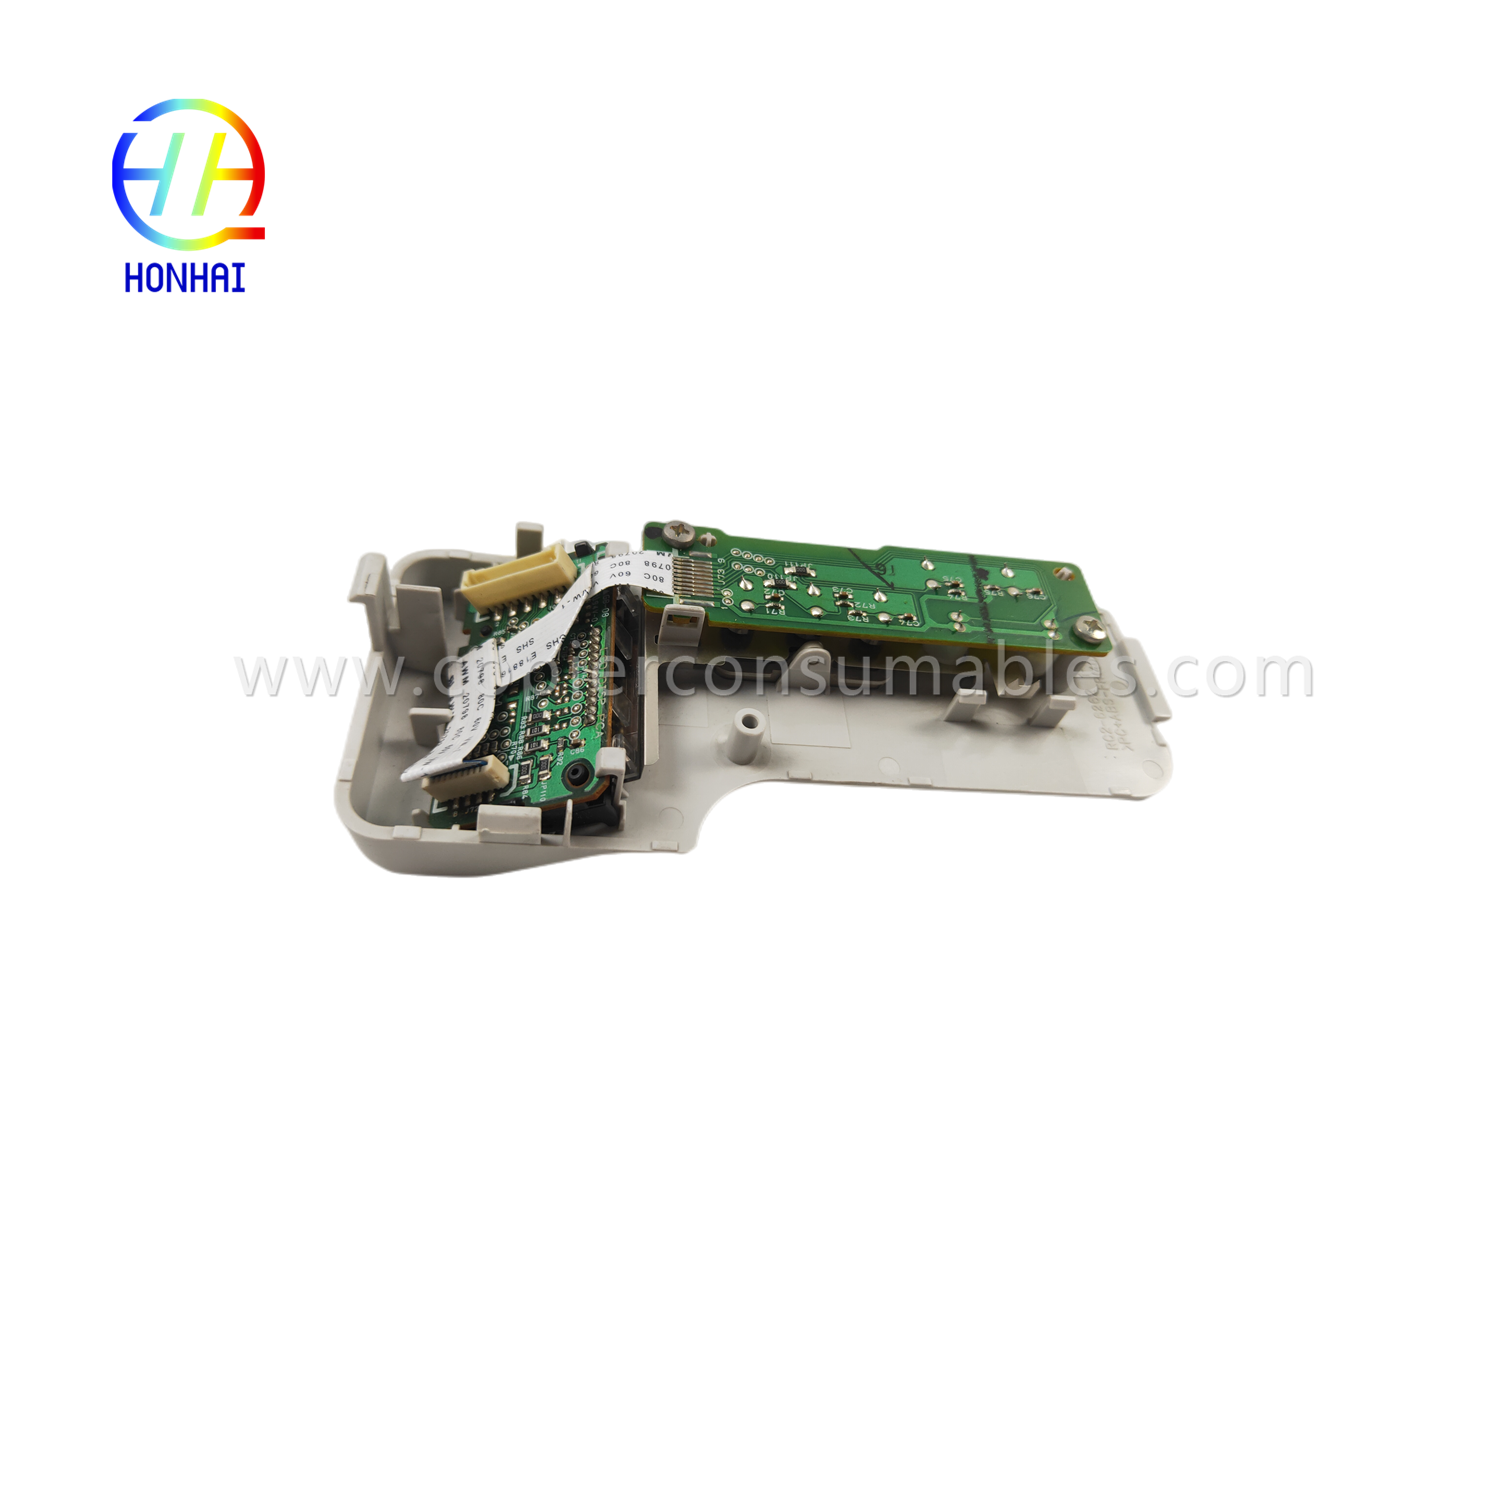 https://c585.grao.net/control-panel-display-for-hp-rc2-6262-p2030-p2035-p2055dn-ምርት/